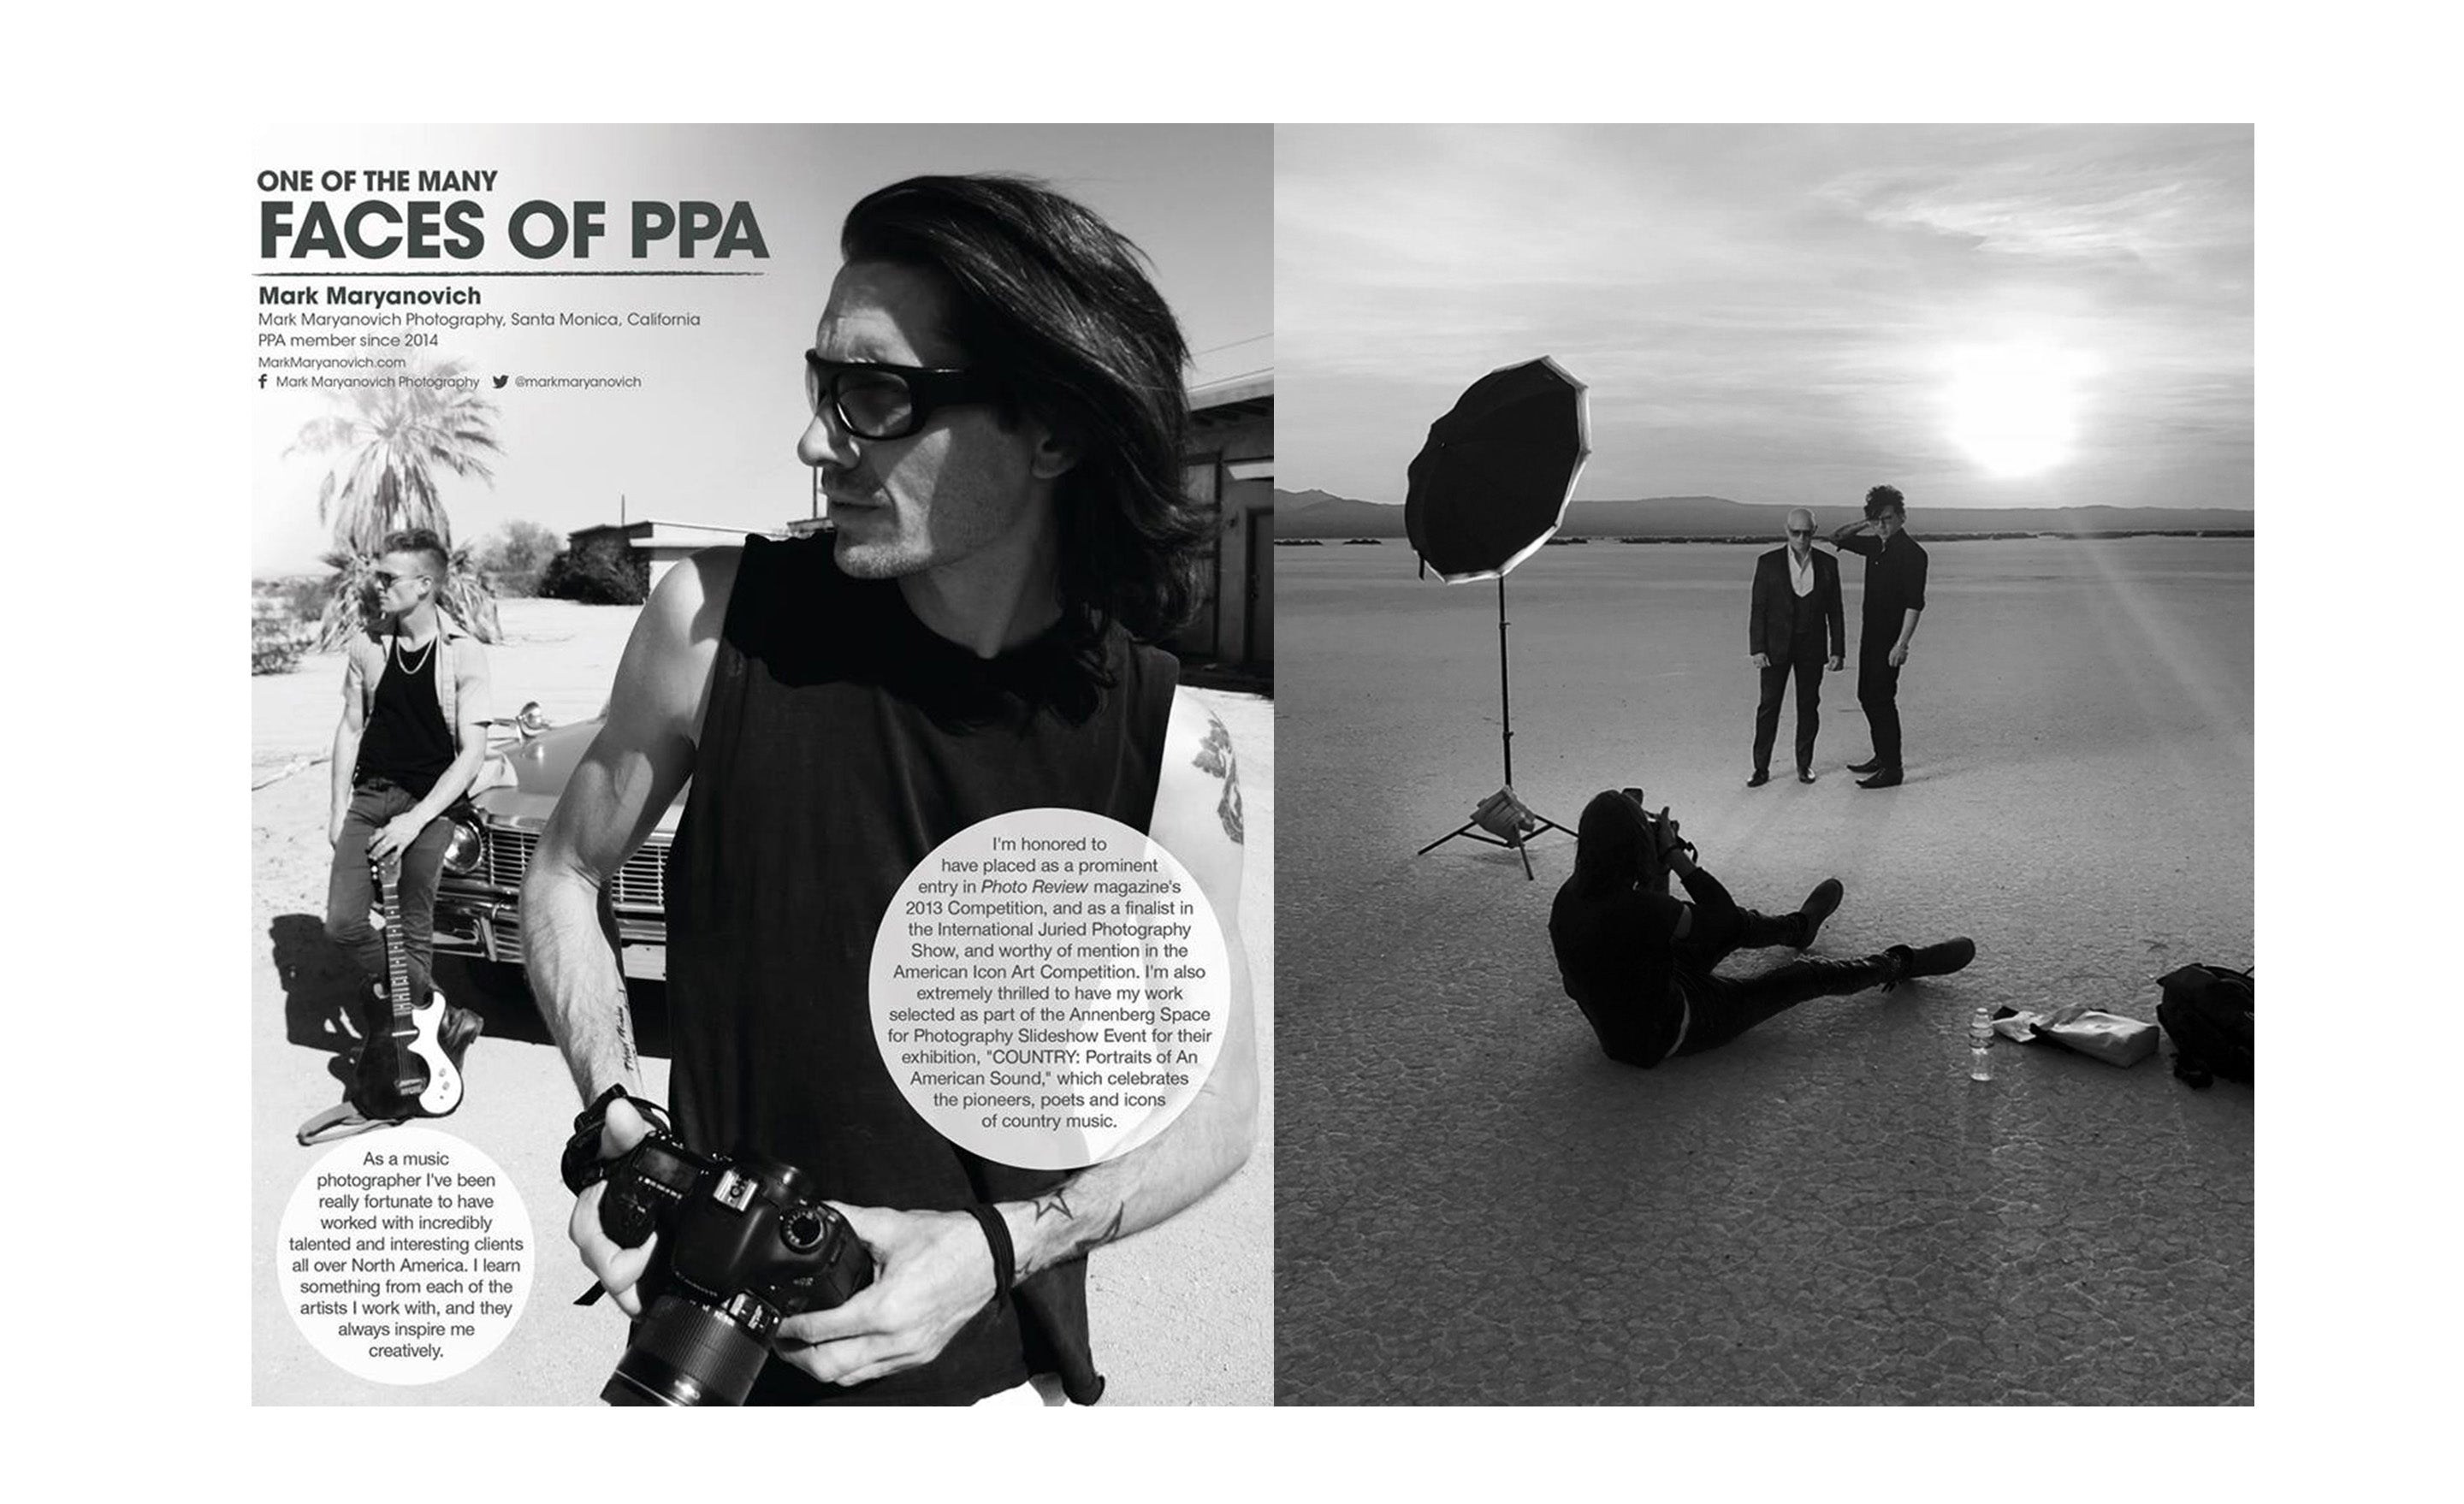 Professional Photographers of America Faces of PPA featuring Mark Maryanovich black and white behind the scenes photos Mark in foreground holding camera client standing with guitar in front of car behind him across from behind the scenes photo Mark sitting on desert floor with flash set up while shooting two musicians